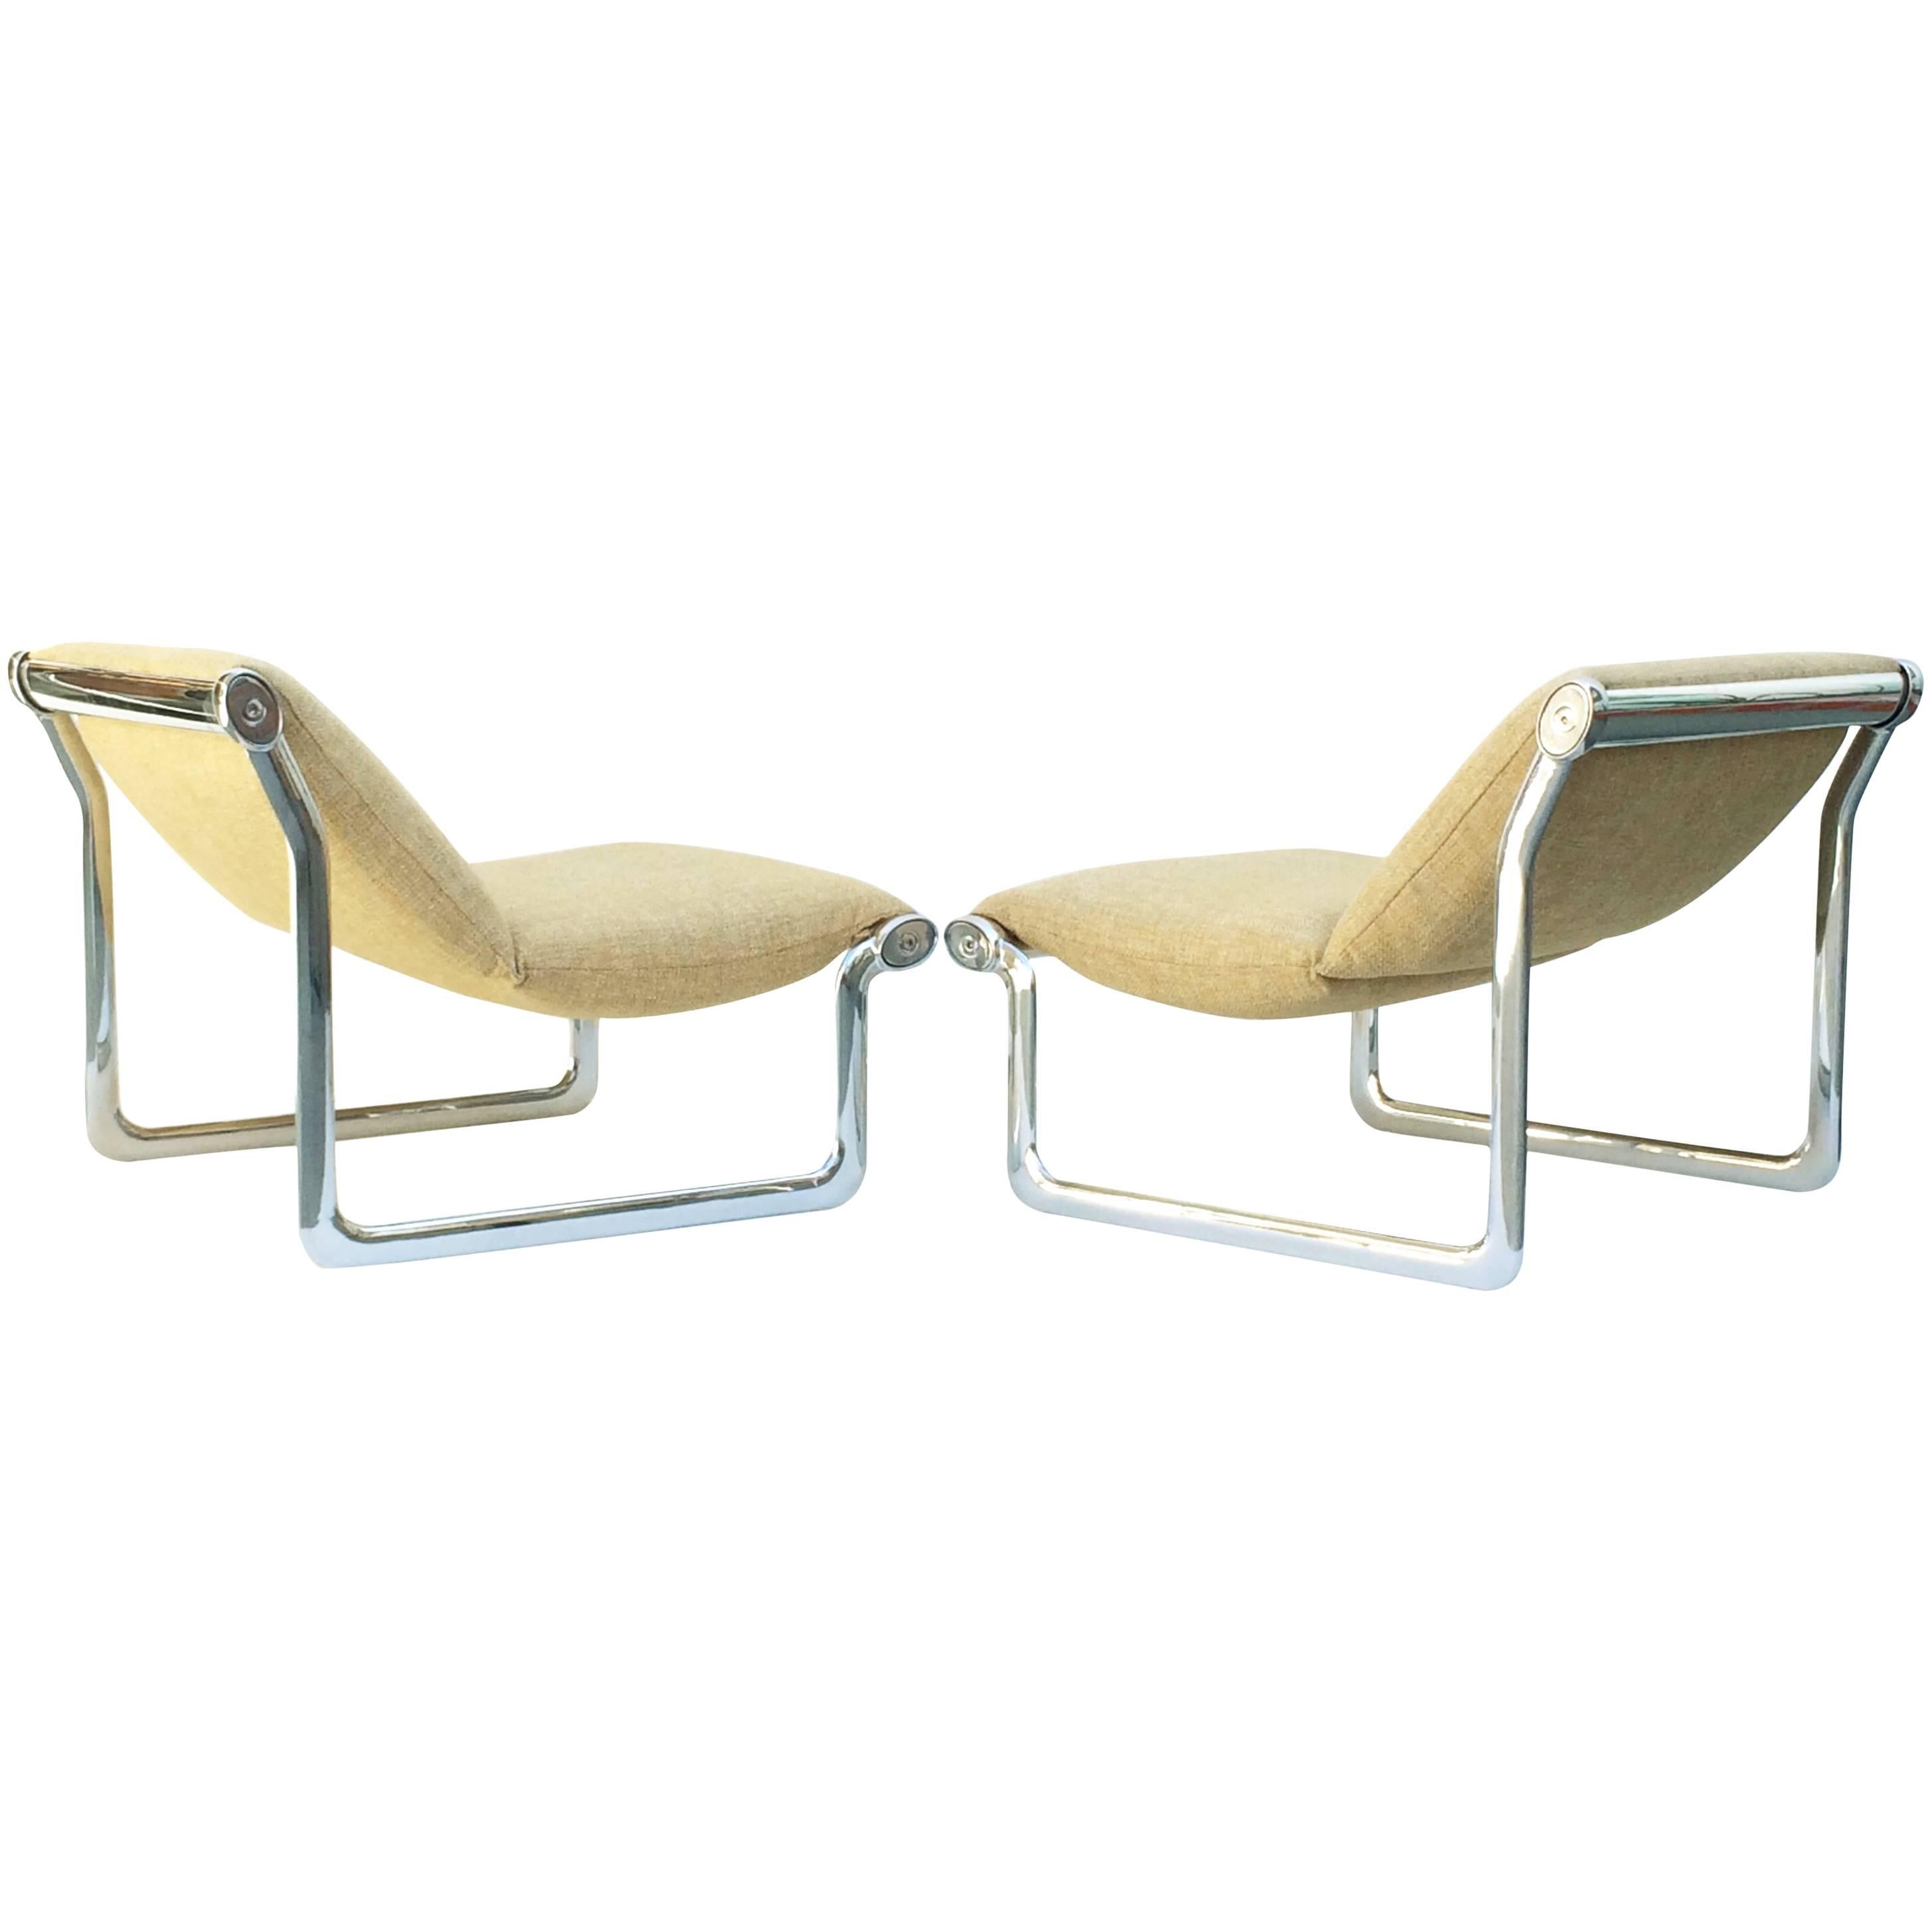 Polished Aluminum Lounge Chairs by Hannah Morrison for Knoll International 